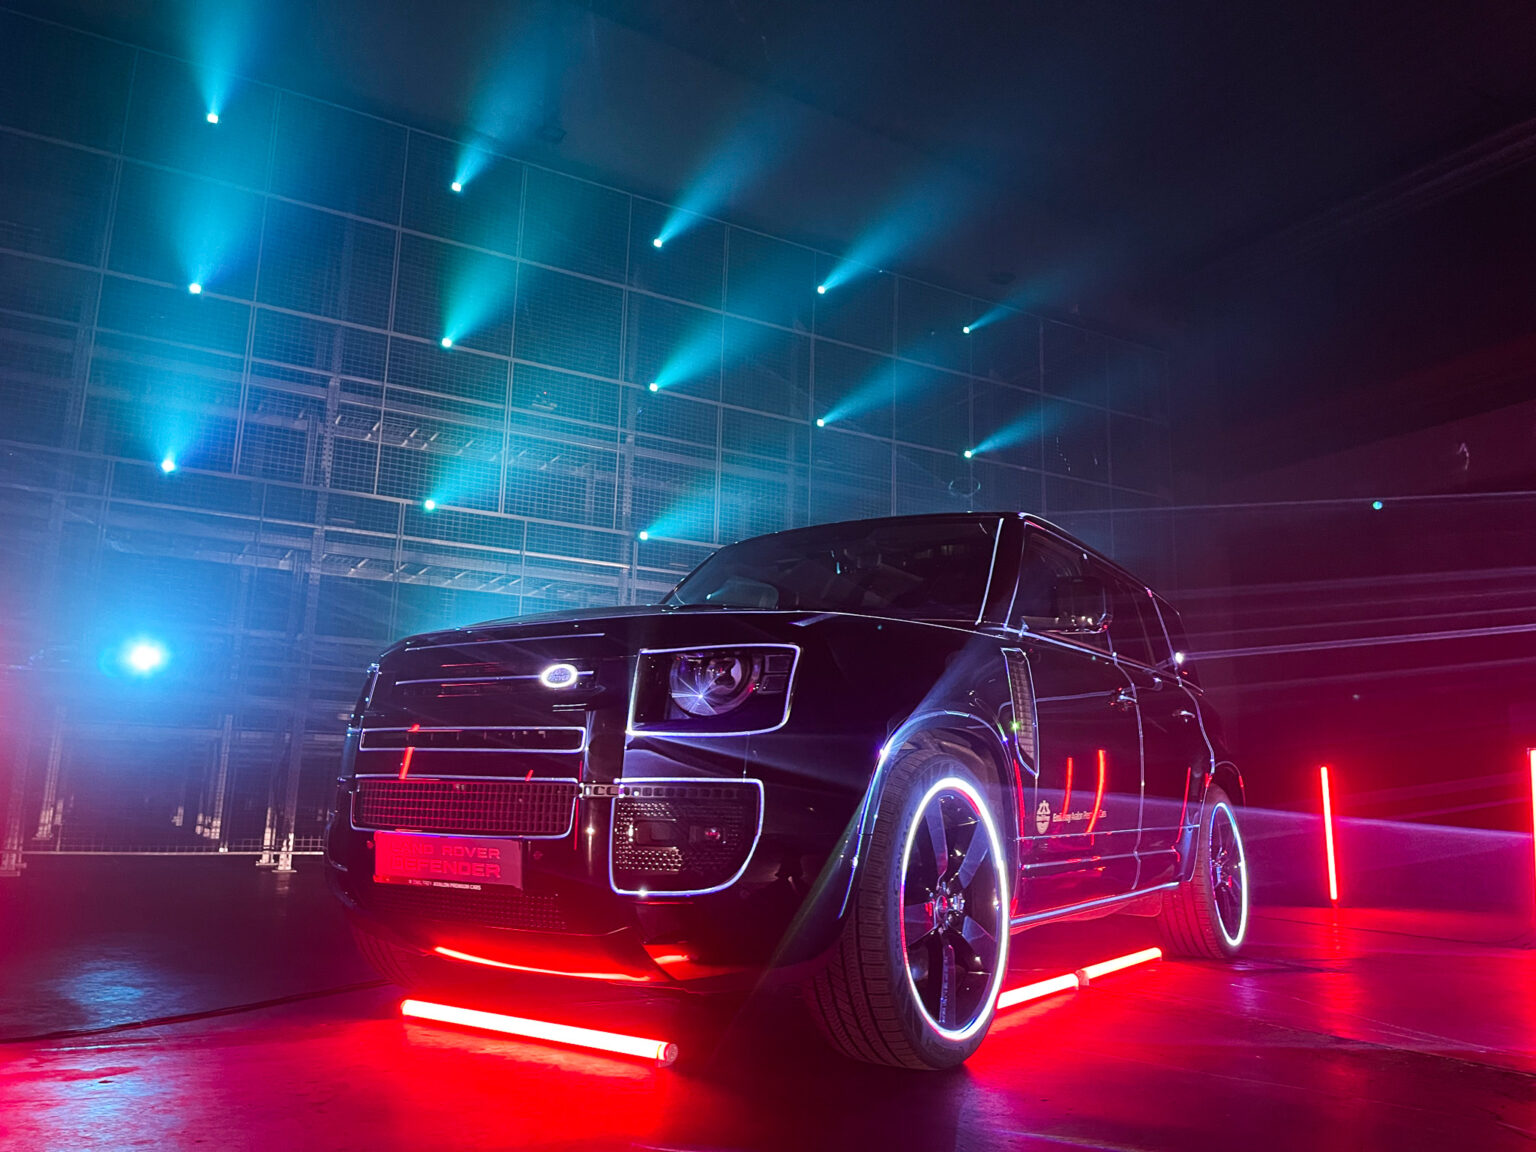 Carmapping with light and lasers